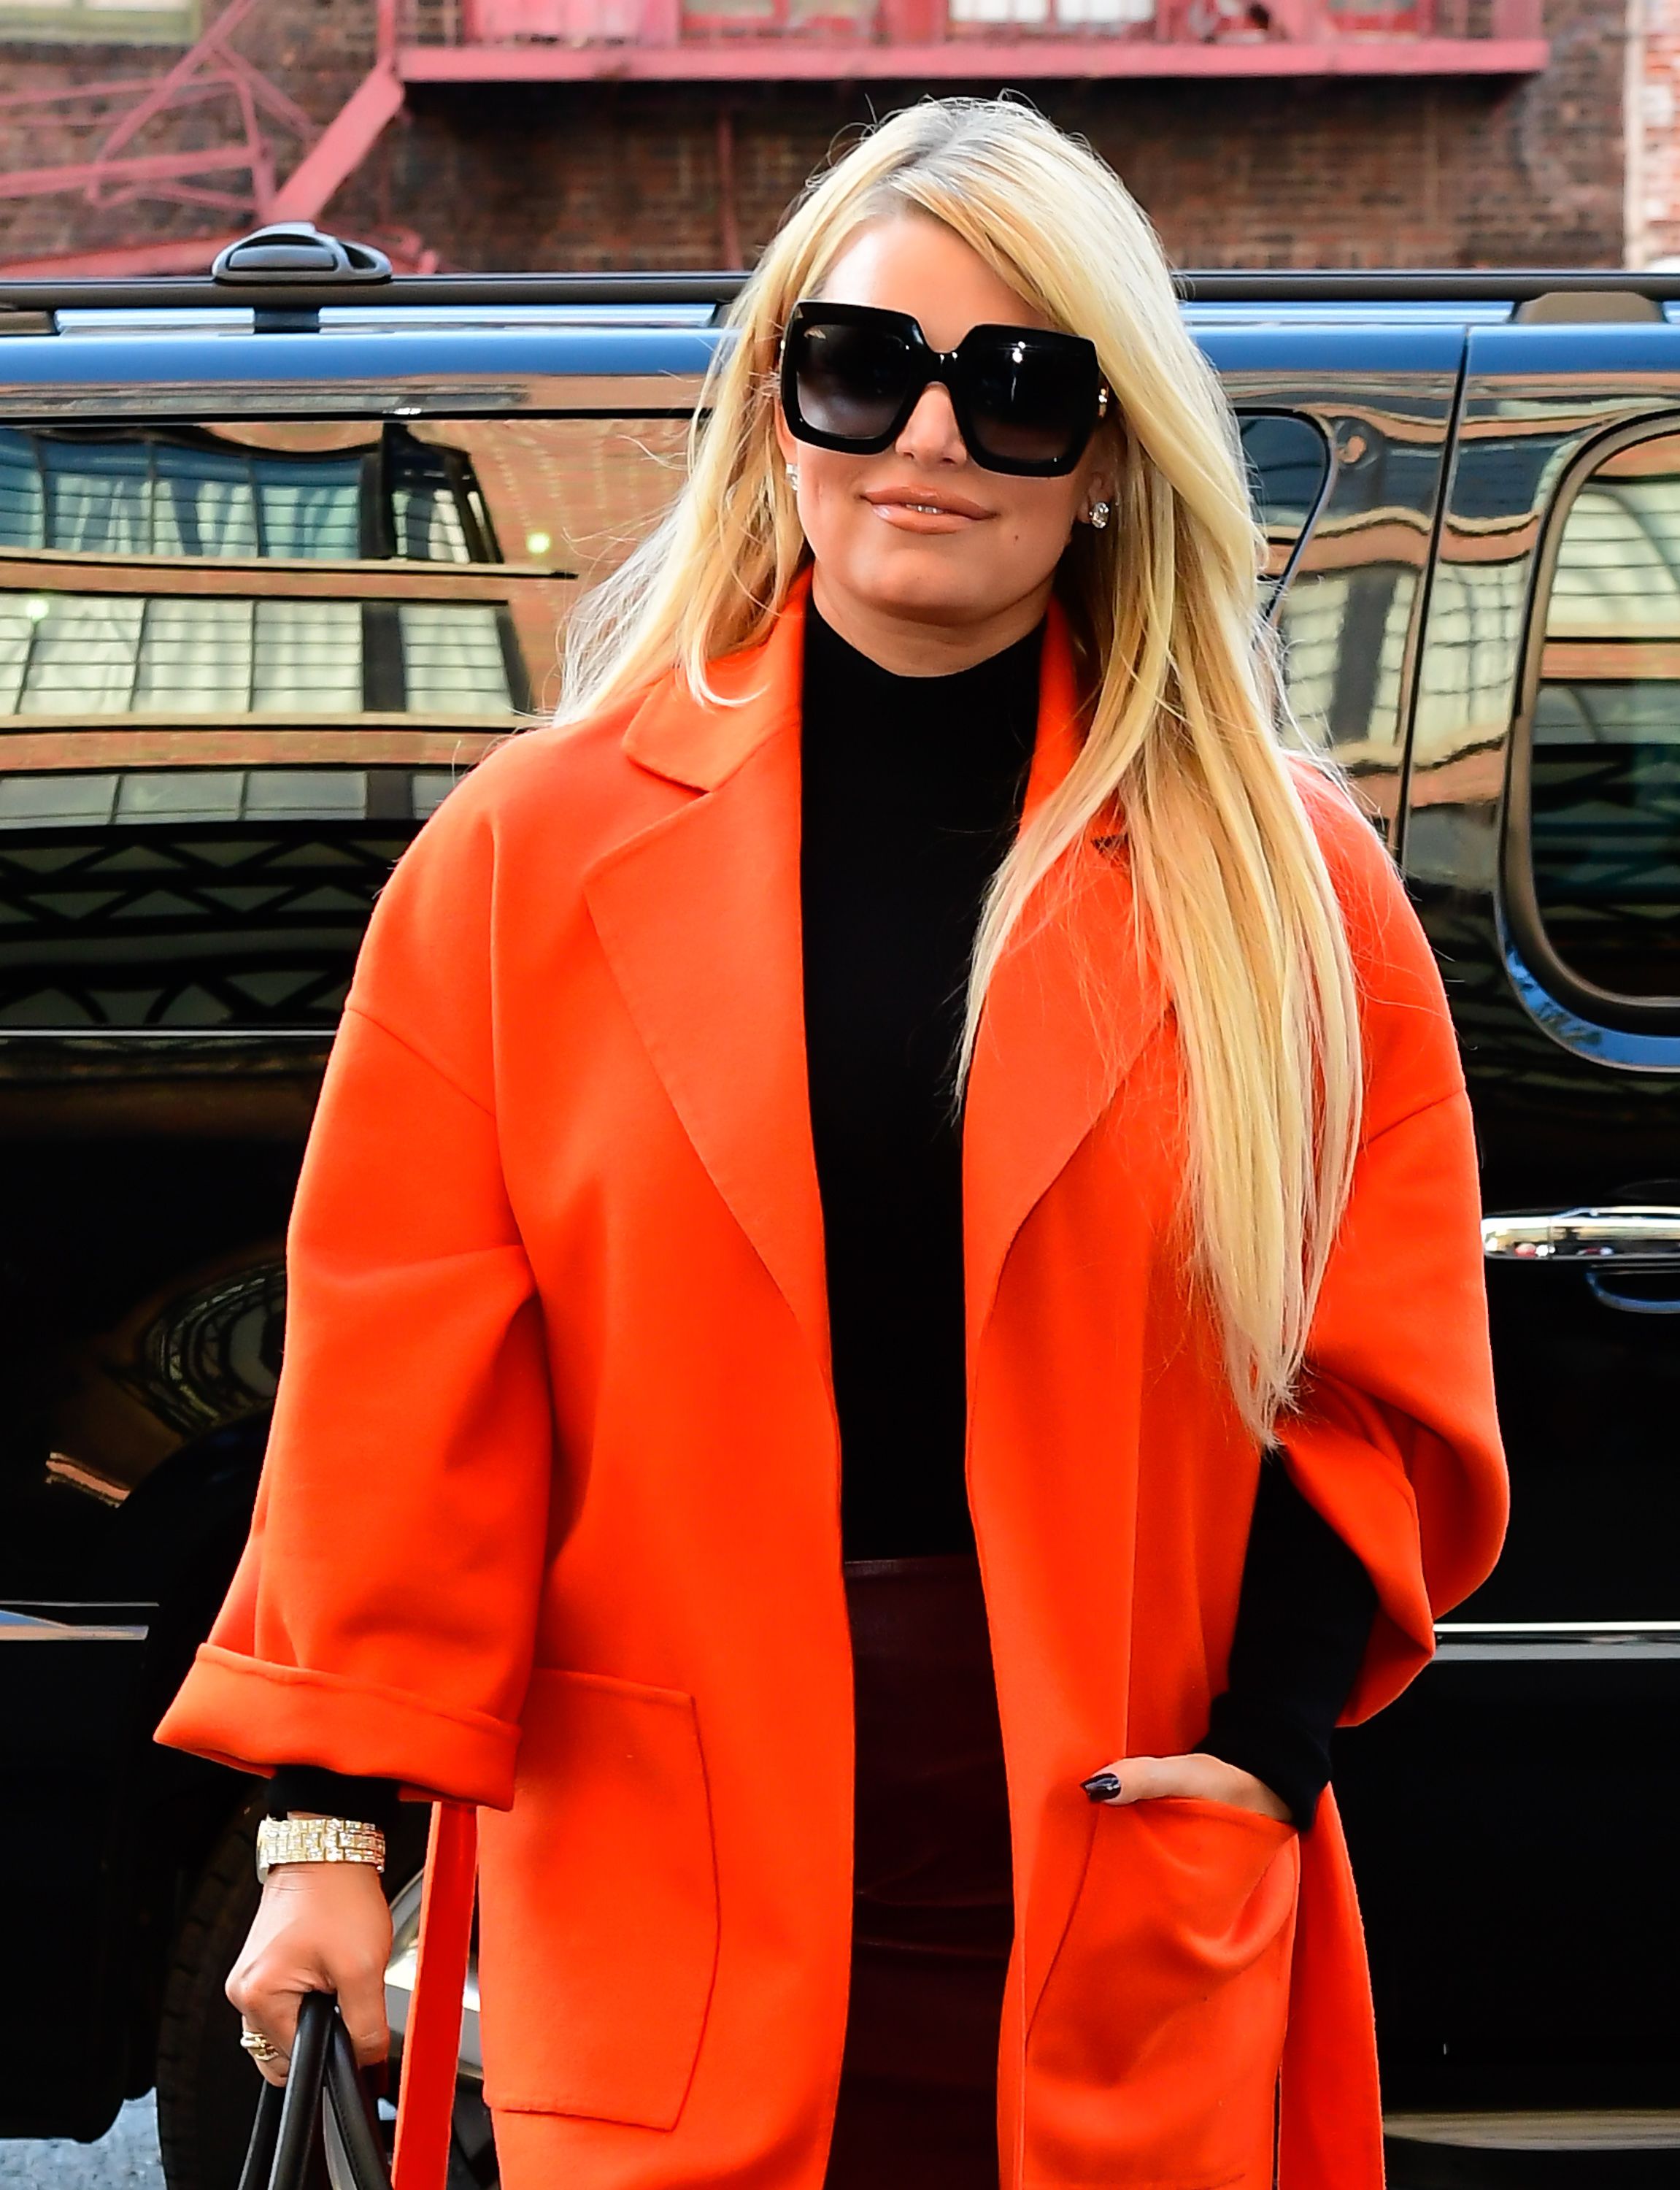 Actress Jessica Simpson at a hotel in SoHo on September 25, 2019 in New York City | Photo: Getty Images